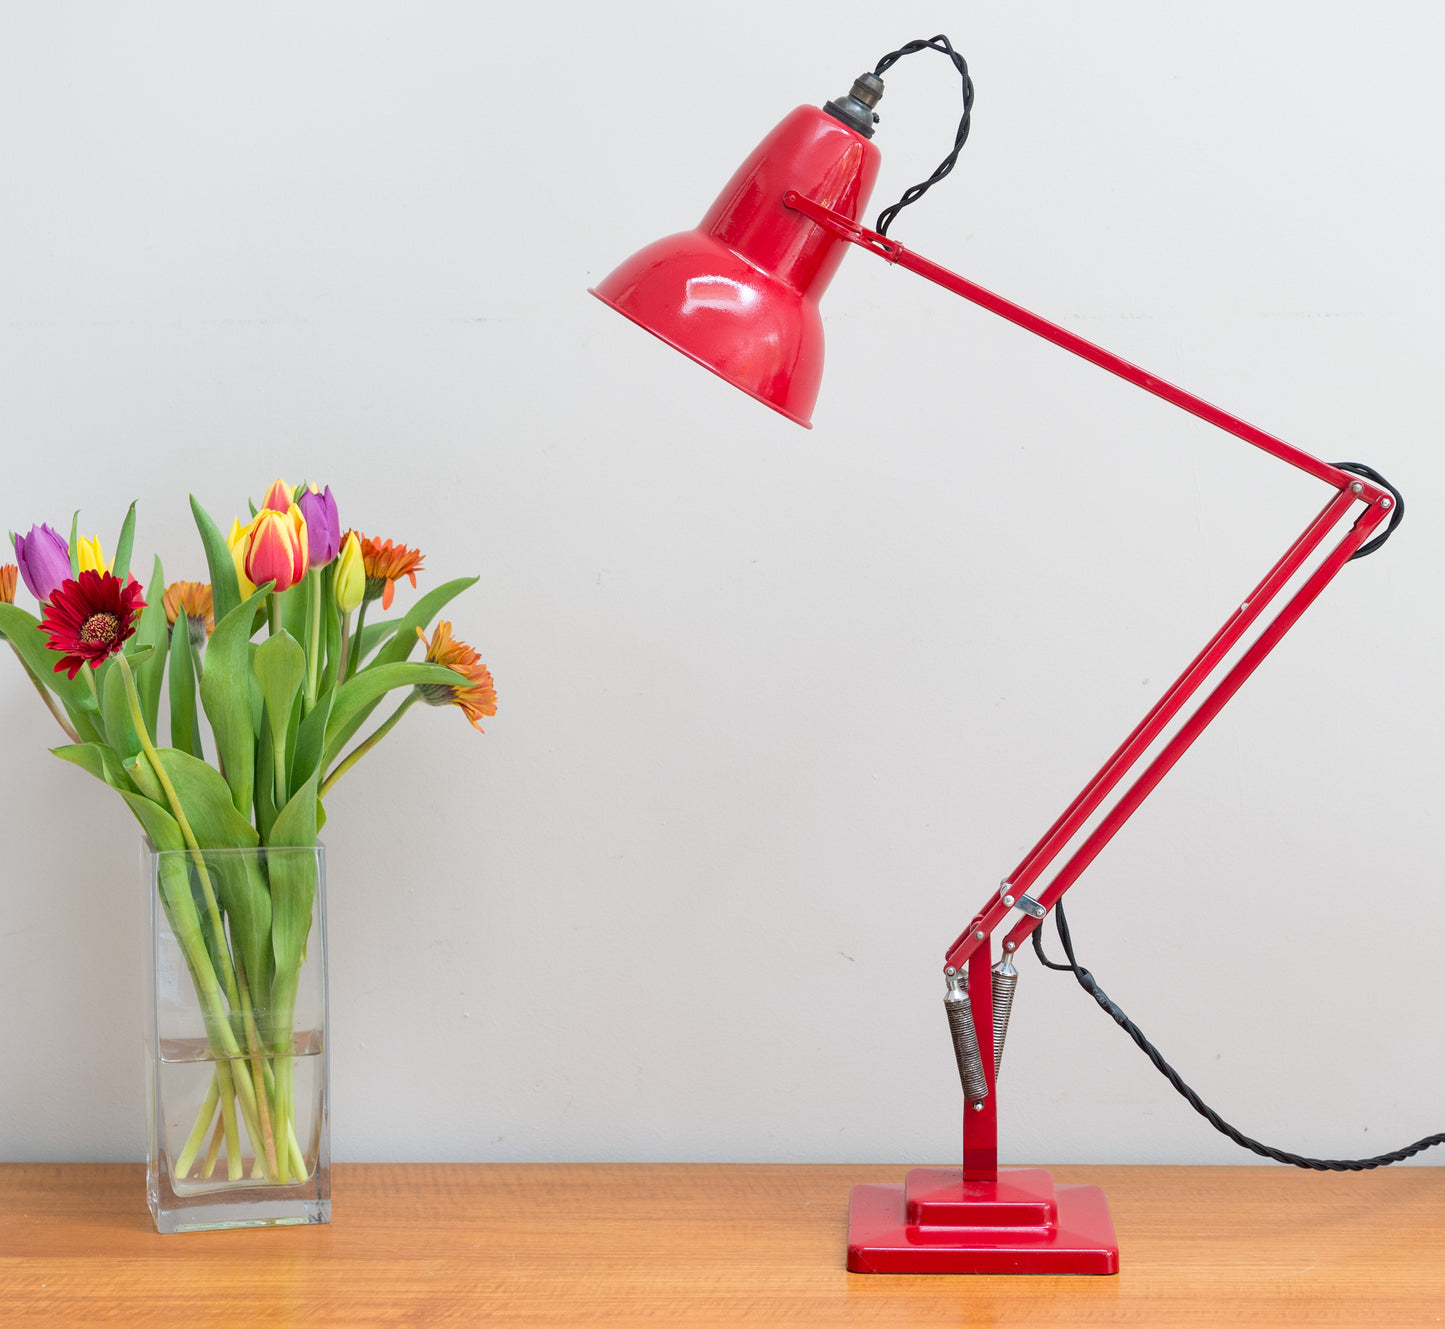 Anglepoise 1227 Desk Lamp Re-Furbished In Red 1950's English